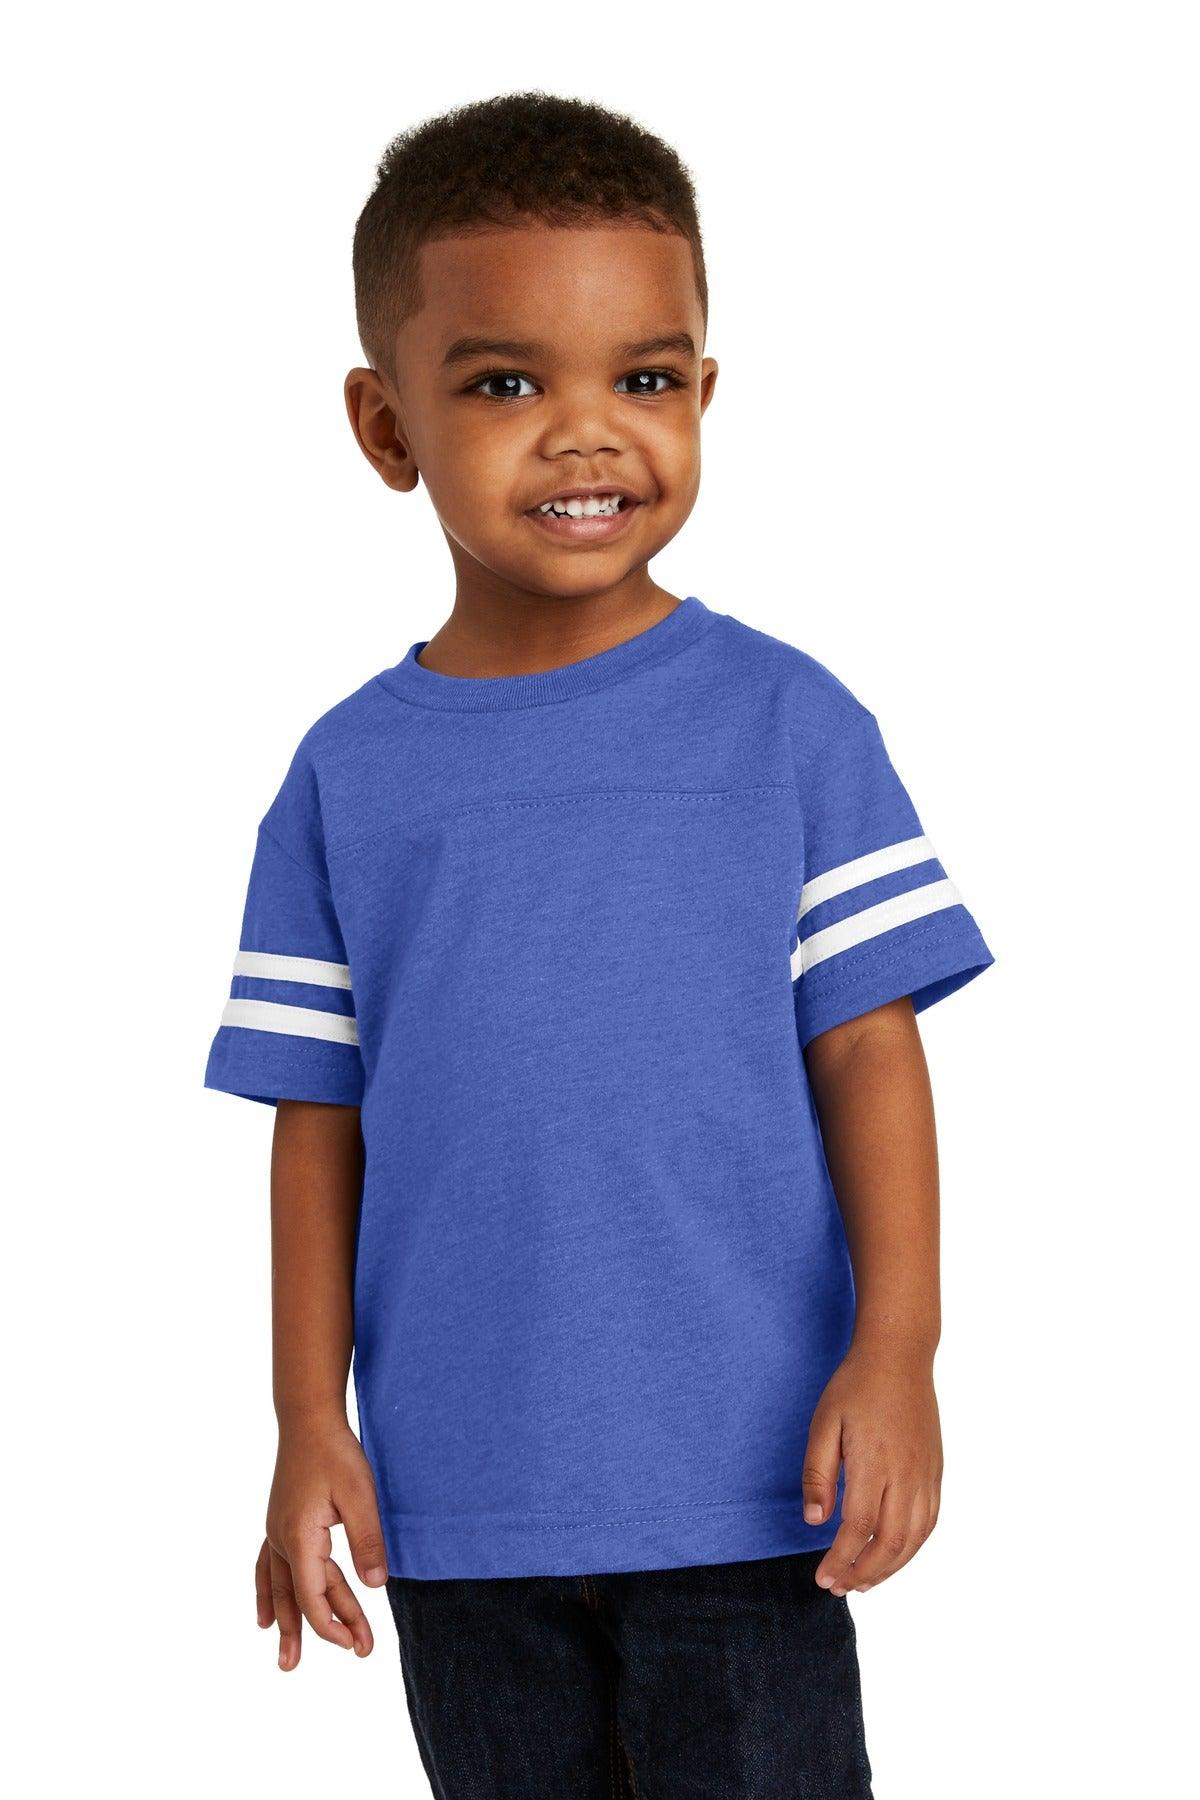 Rabbit Skins Toddler Football Fine Jersey Tee. RS3037 - Dresses Max